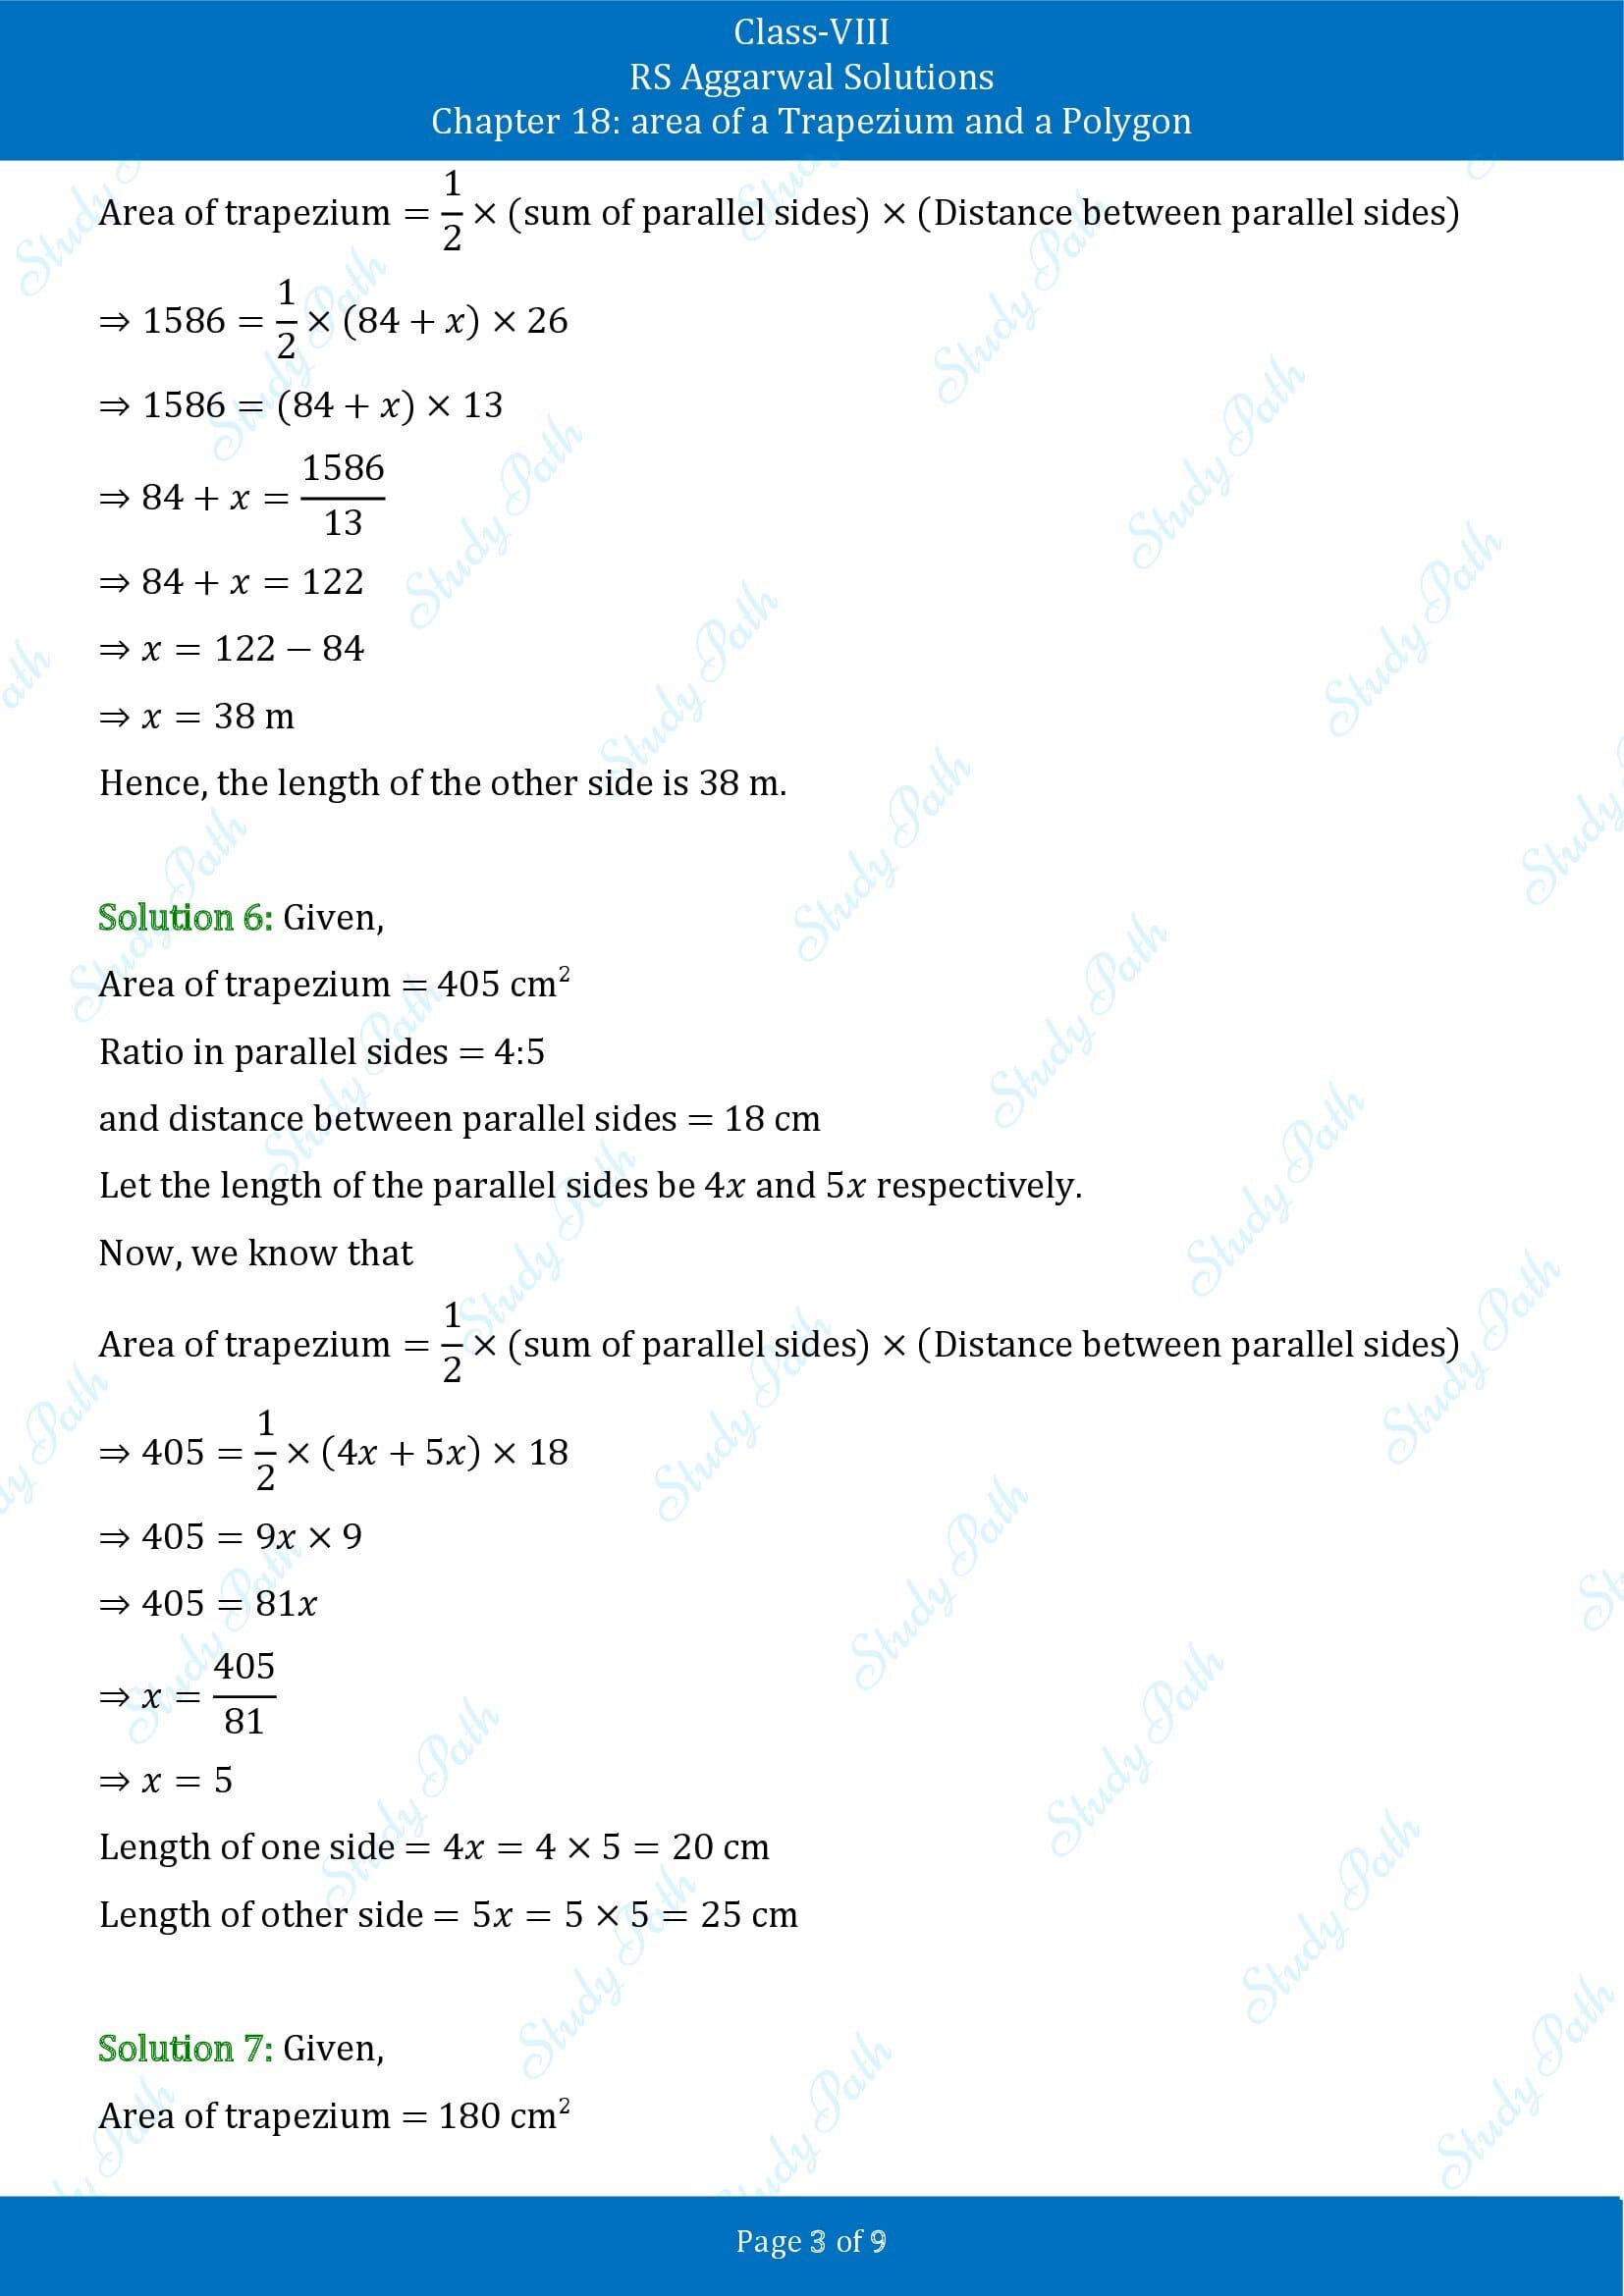 RS Aggarwal Solutions Class 8 Chapter 18 Area of a Trapezium and a Polygon Exercise 18A 00003